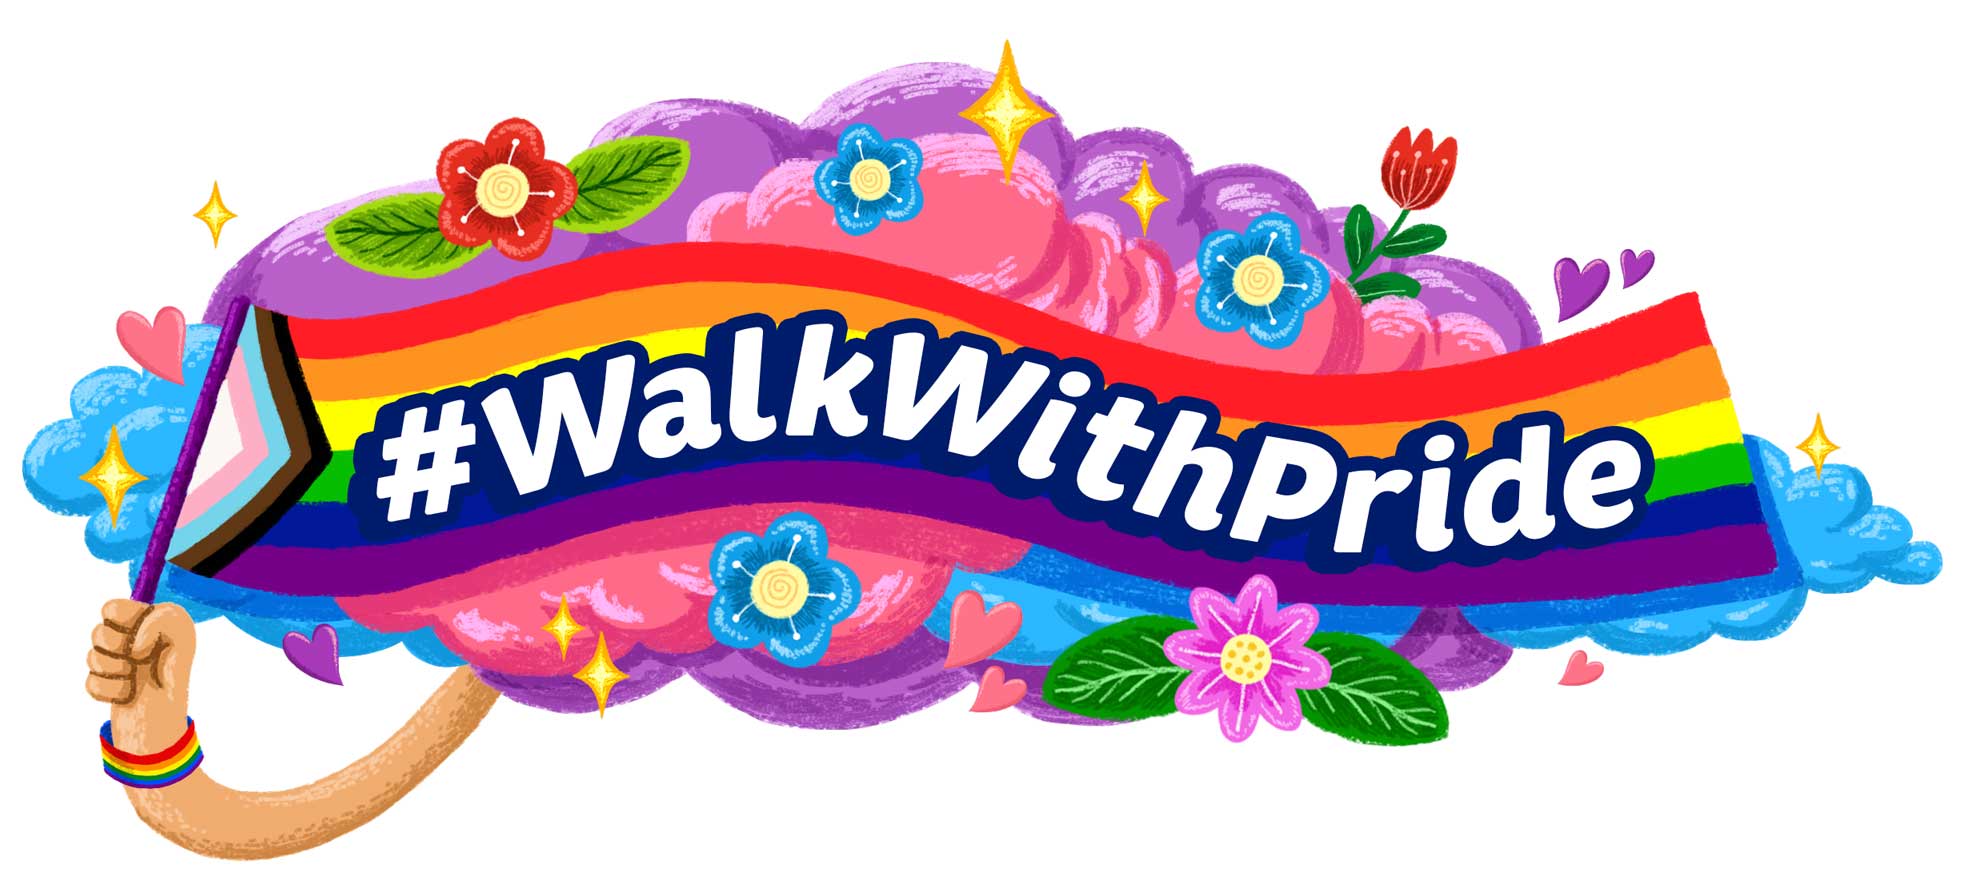 walk with pride filter